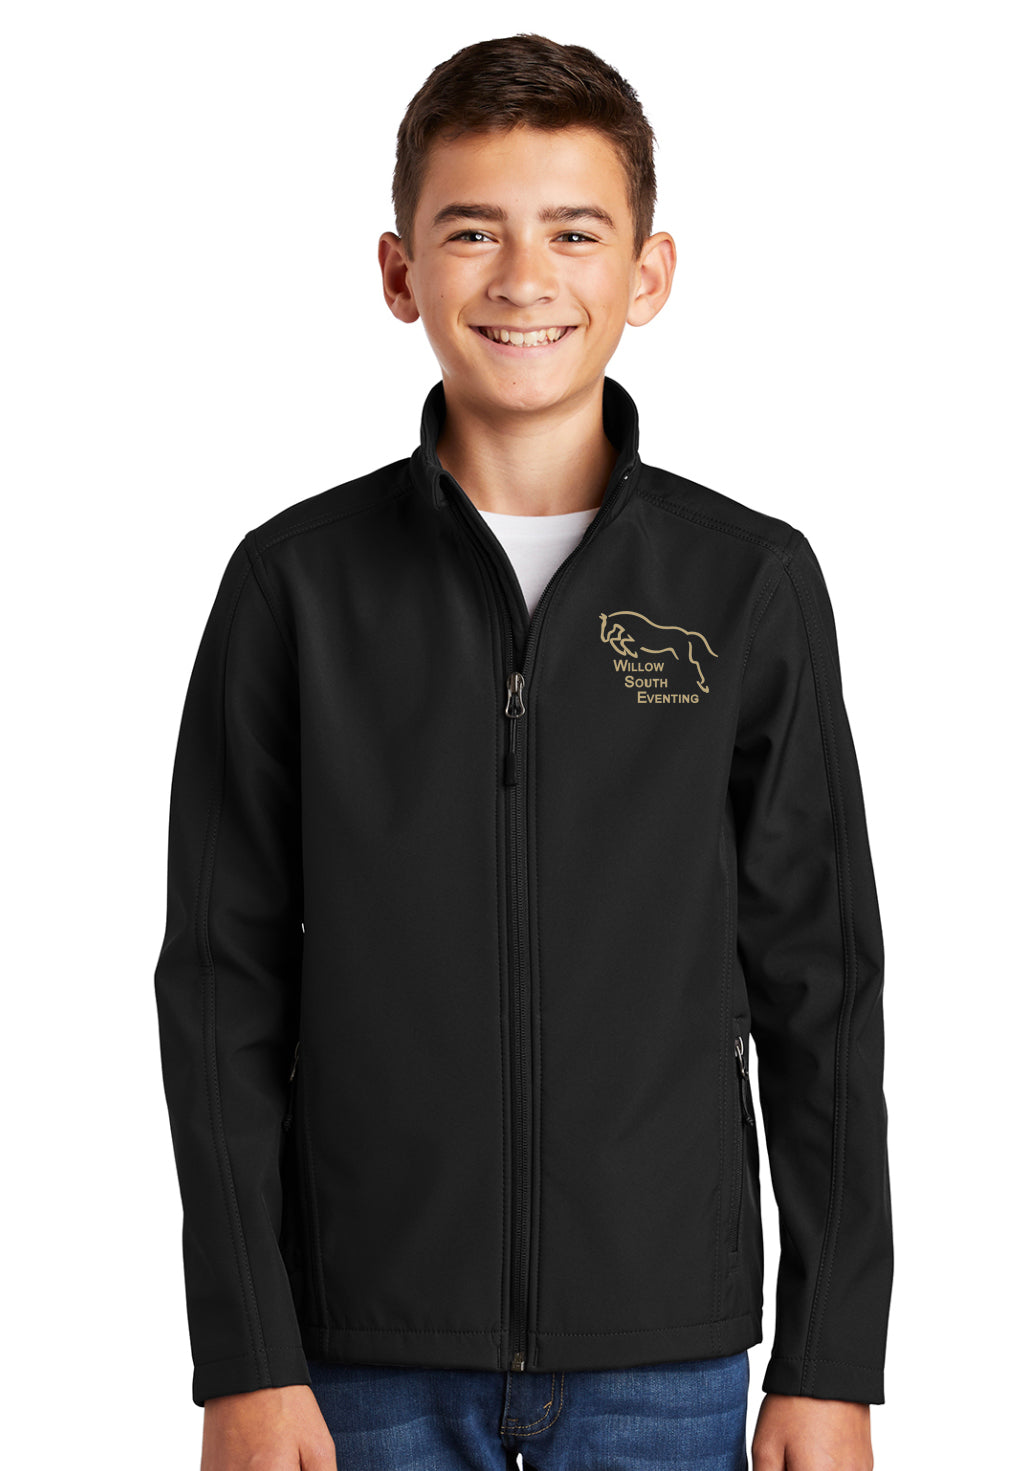 Willow South Eventing Youth Soft Shell Jacket